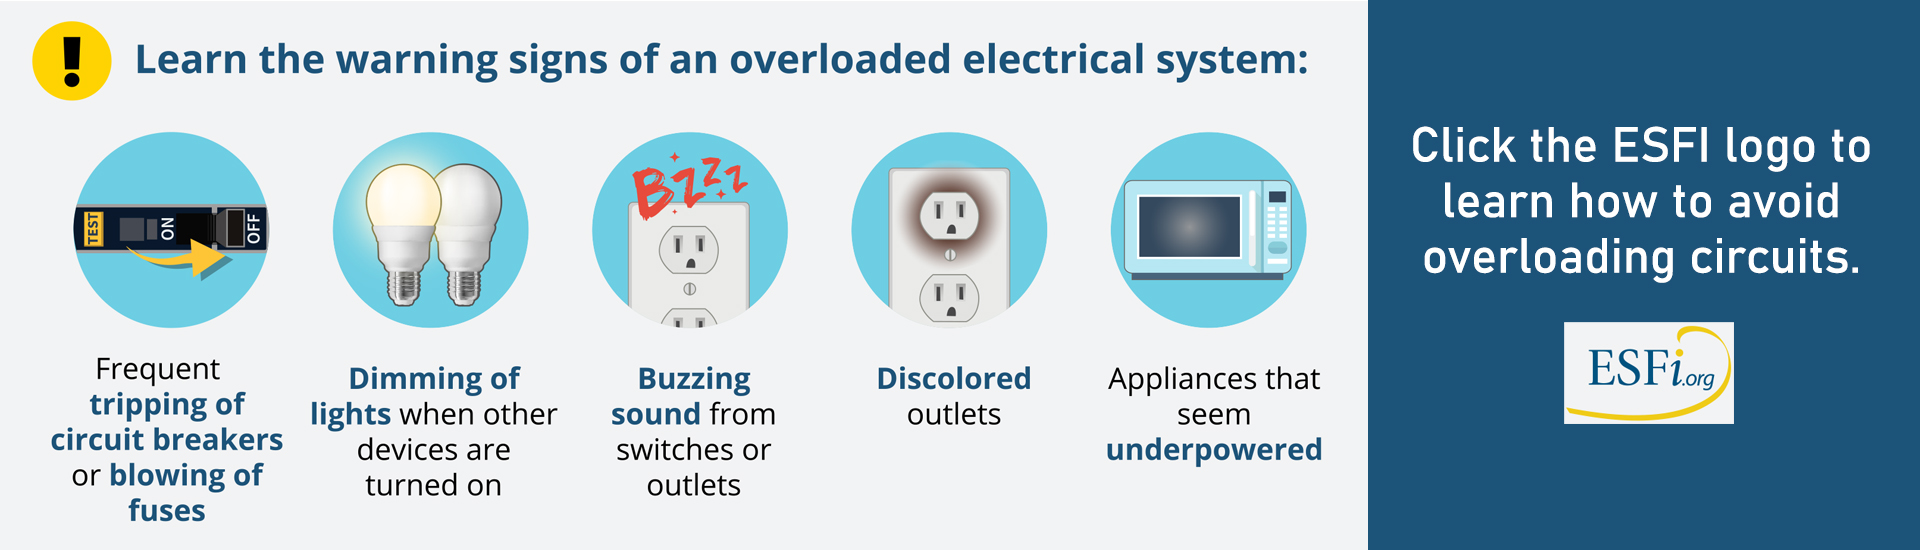 Don't overload your electrical system